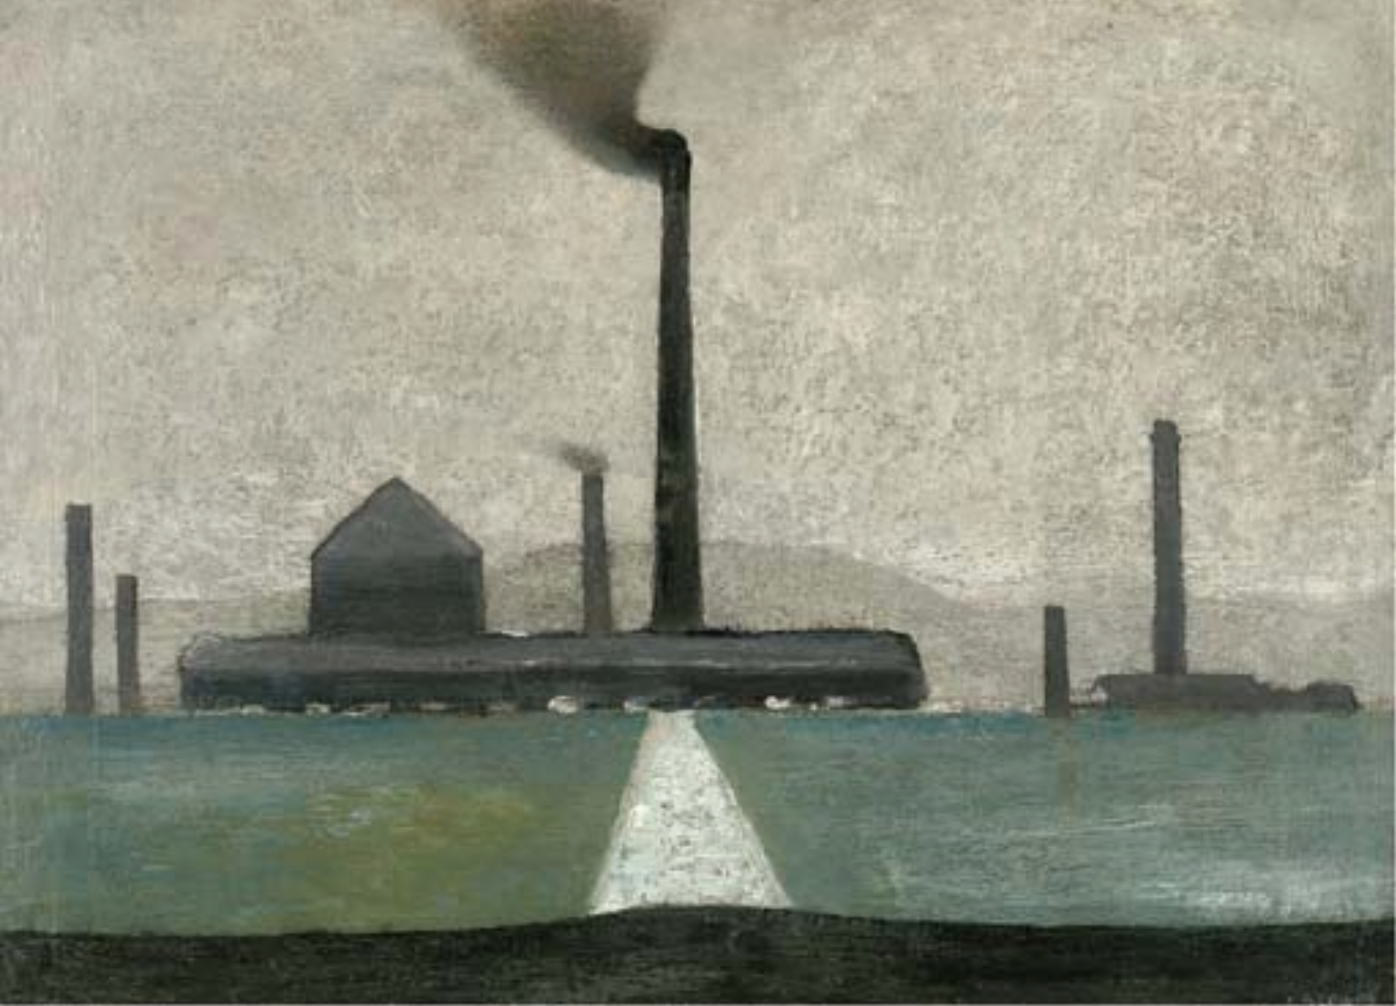 Derbyshire Steel Mills (Unknown) by Laurence Stephen Lowry (1887 - 1976), English artist.